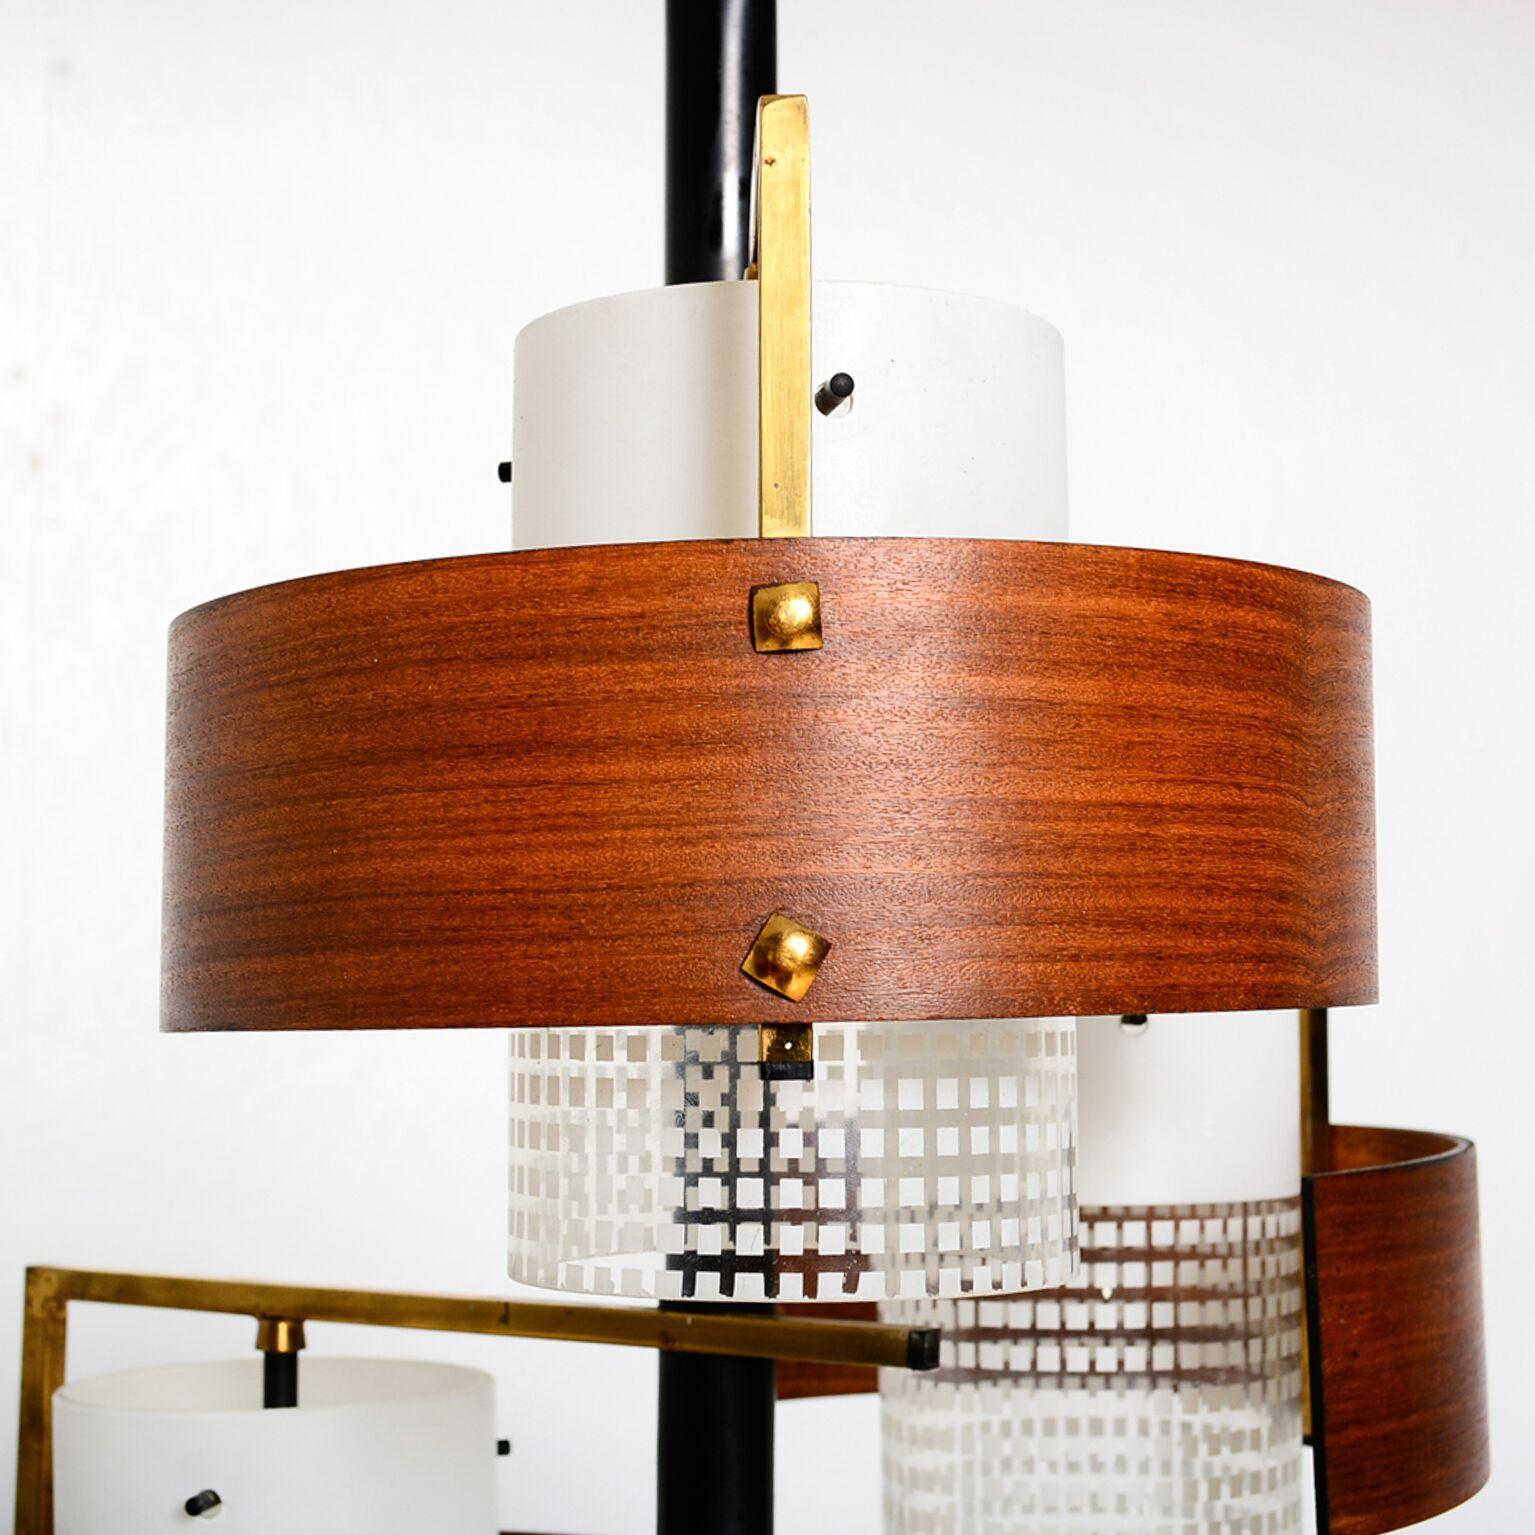 For your consideration a vintage Italian chandelier with glass and bent teak plywood diffusers.

The fixture requires three (3) E14 bulbs, not included.

Made in Italy, circa 1960s. Attributed to Stilux. No maker label present.

Very good